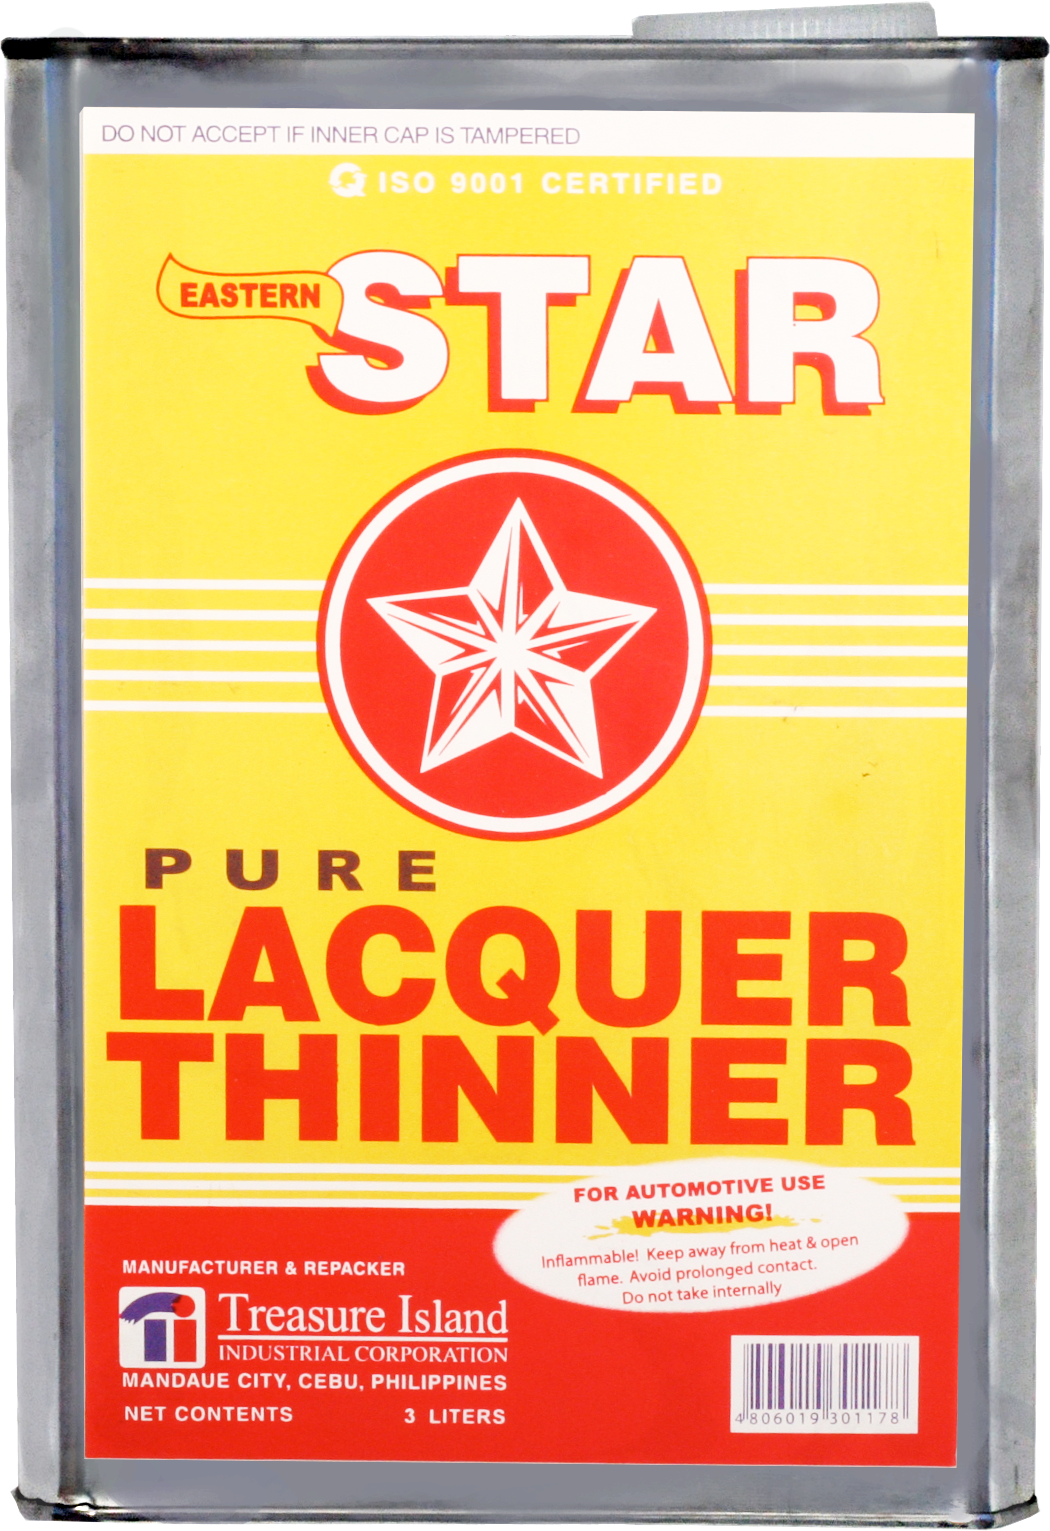 Star-Lacquer-Thinner